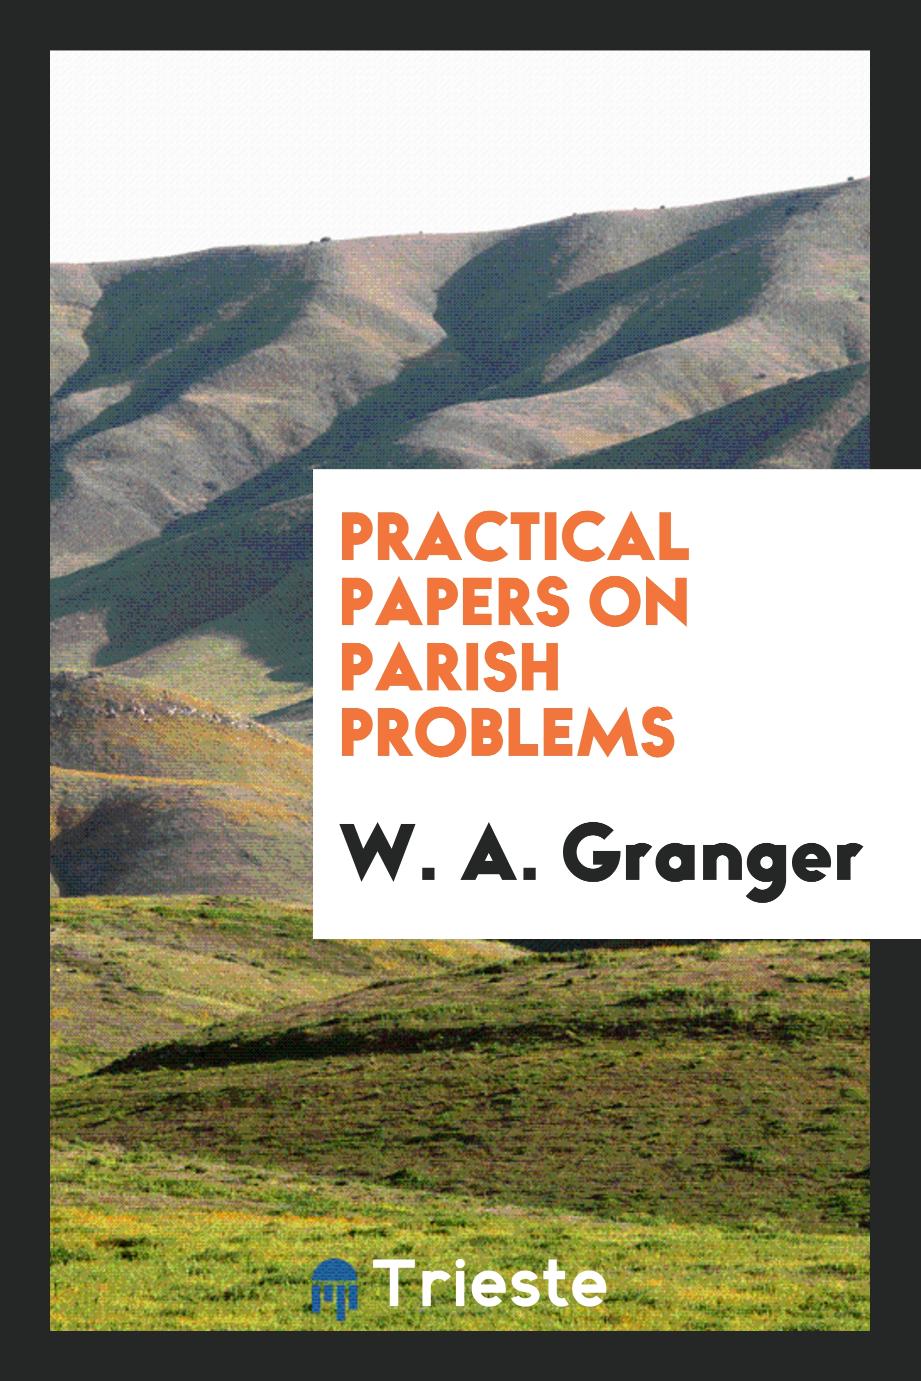 Practical Papers on Parish Problems